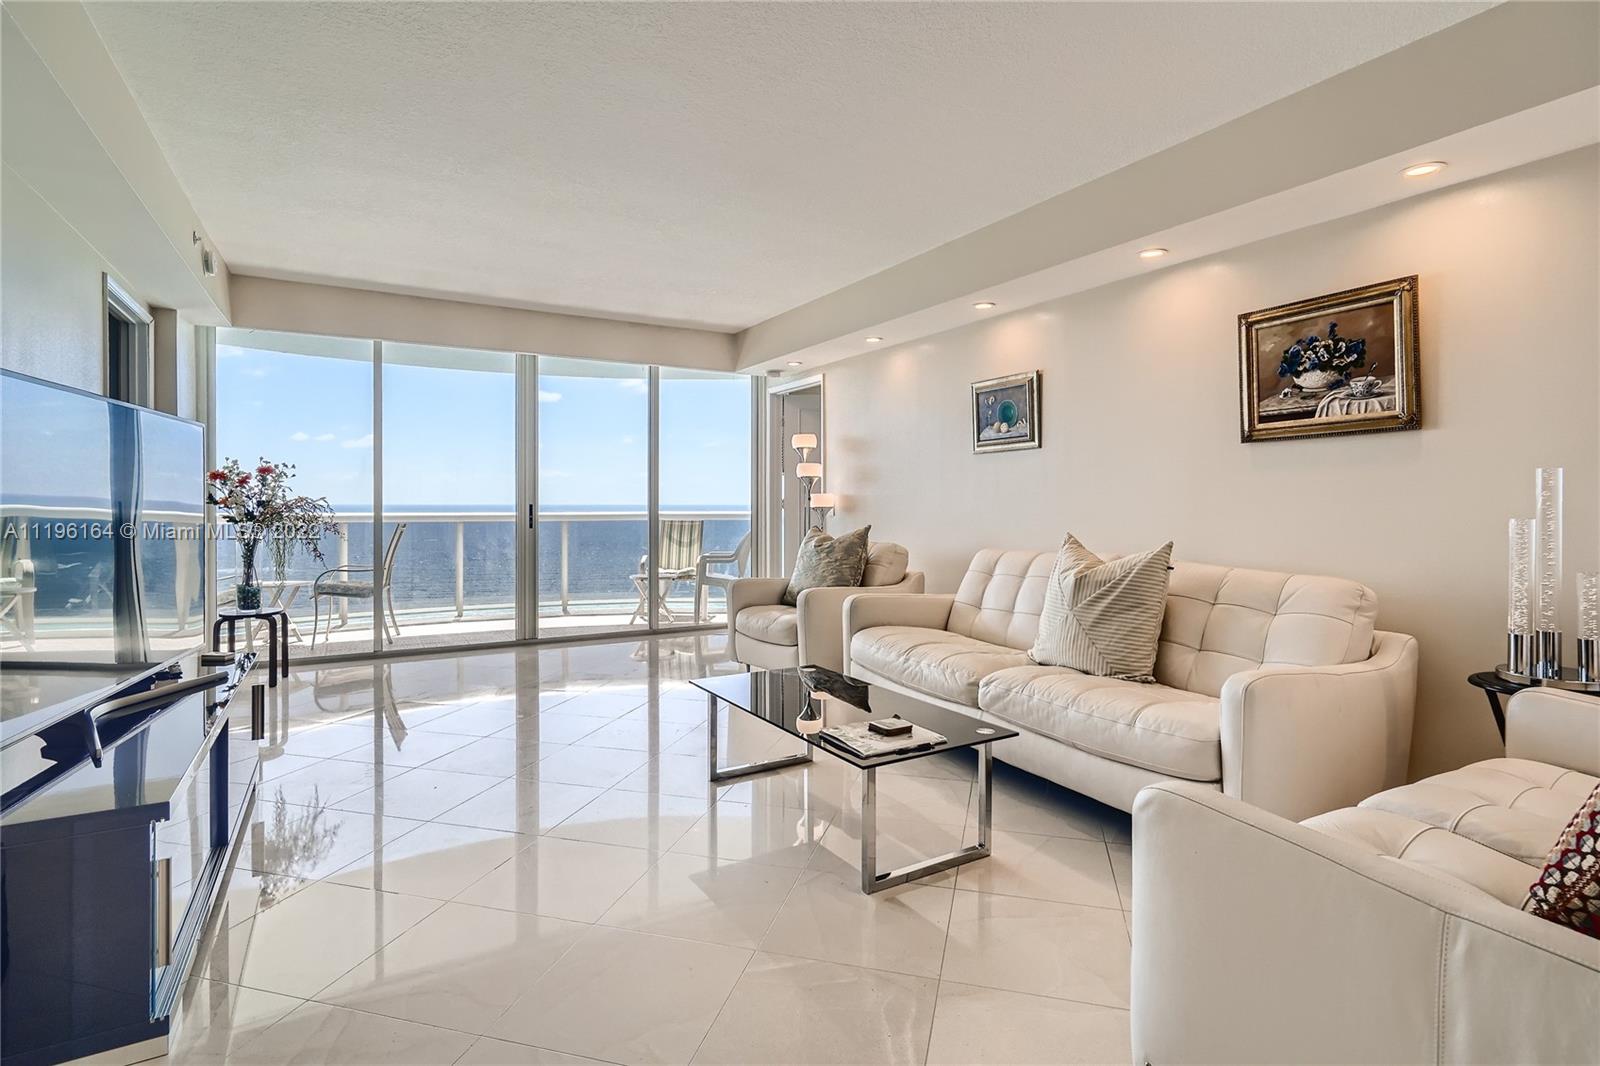 Spectacular and Gorgeous Flow-Through 3 Bedroom 3 Bathroom in The Pinnacle Condo. Breathtaking Ocean Views, Impact Windows, Huge Master Suite with Double Sinks, Roman Tub and Walk-In Closet. First Class Amenities such as a Heated Pool, Tennis Court, Exercise Room, Library, Theater Room, Sauna, Children's Playroom, 24/7 Security, Valet Parking, Beach Service and More!